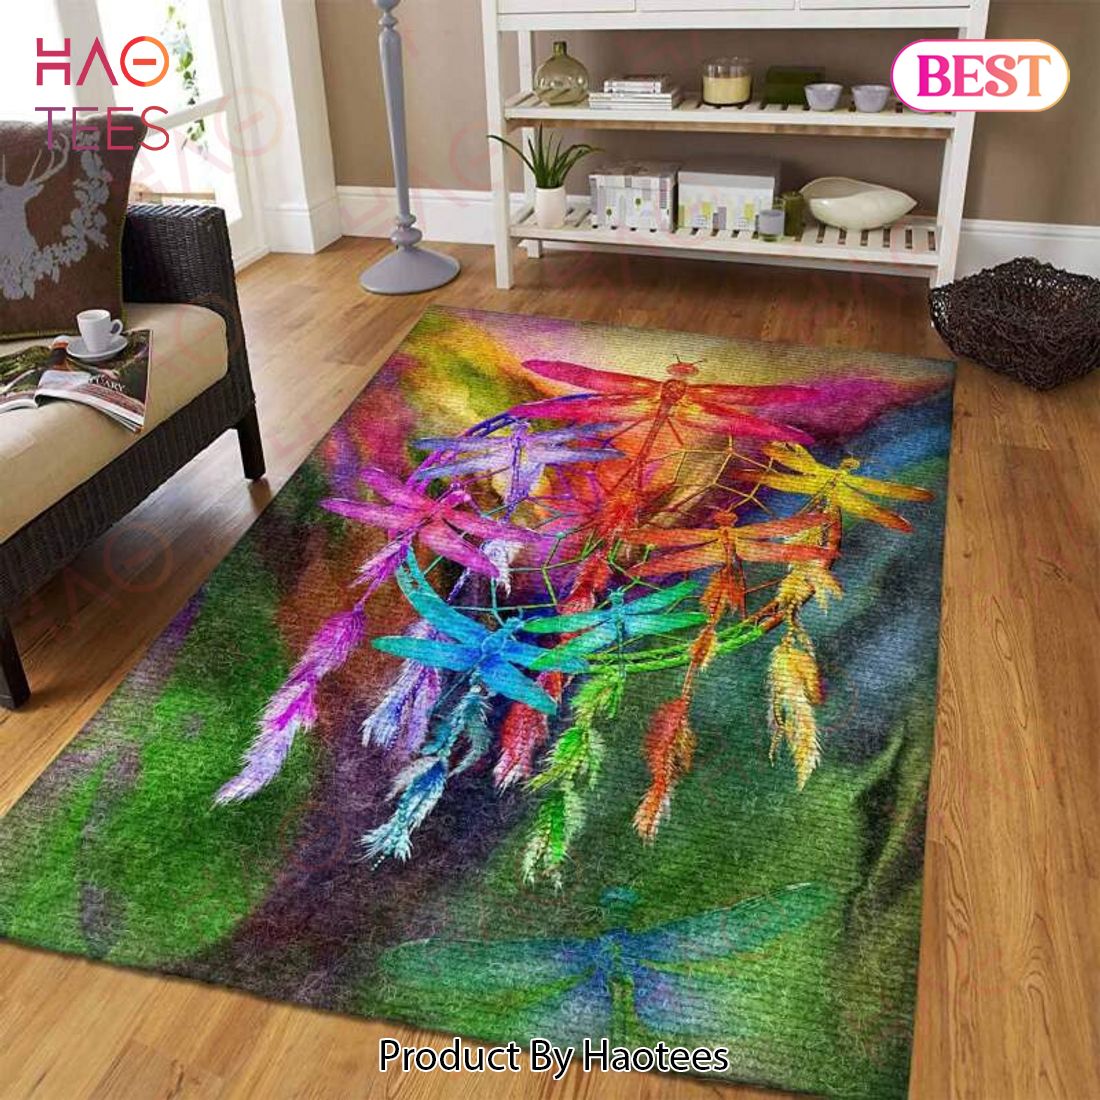 Dragonfly Limited Edition Area Rugs Carpet Mat Kitchen Rugs Floor Decor - OS41